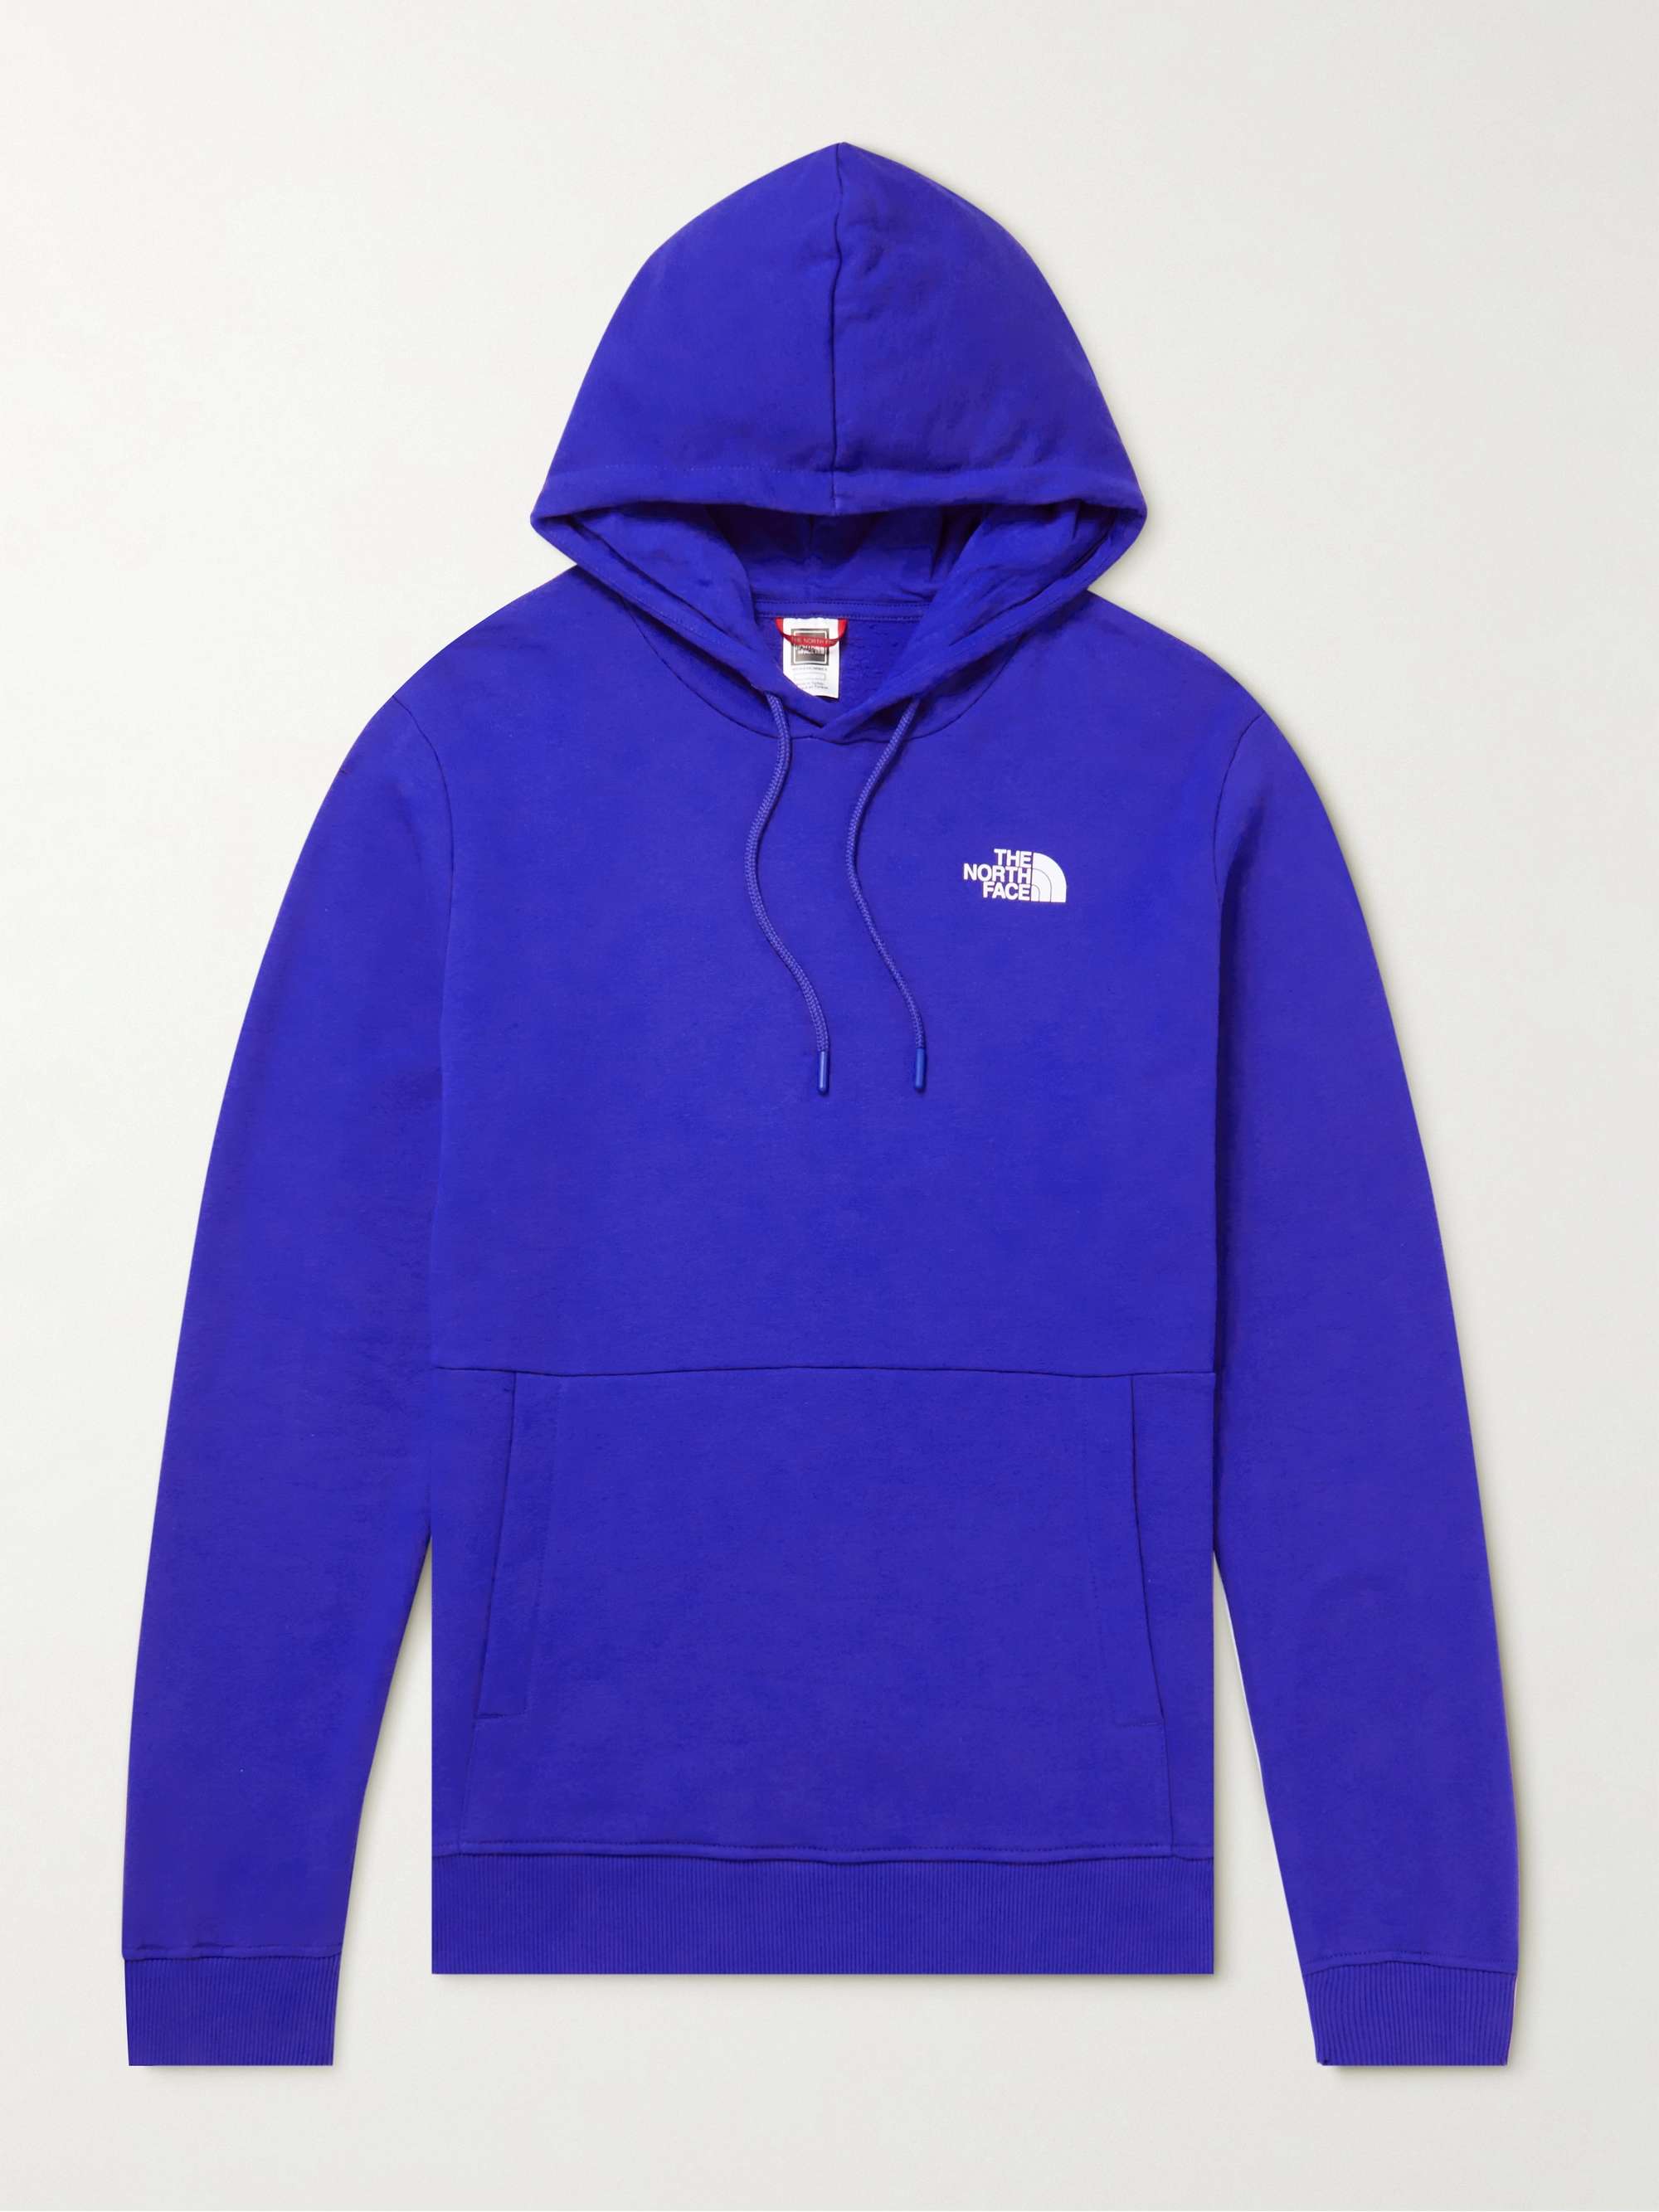 THE NORTH FACE Coordinates Logo-Print Cotton-Jersey Hoodie | MR PORTER